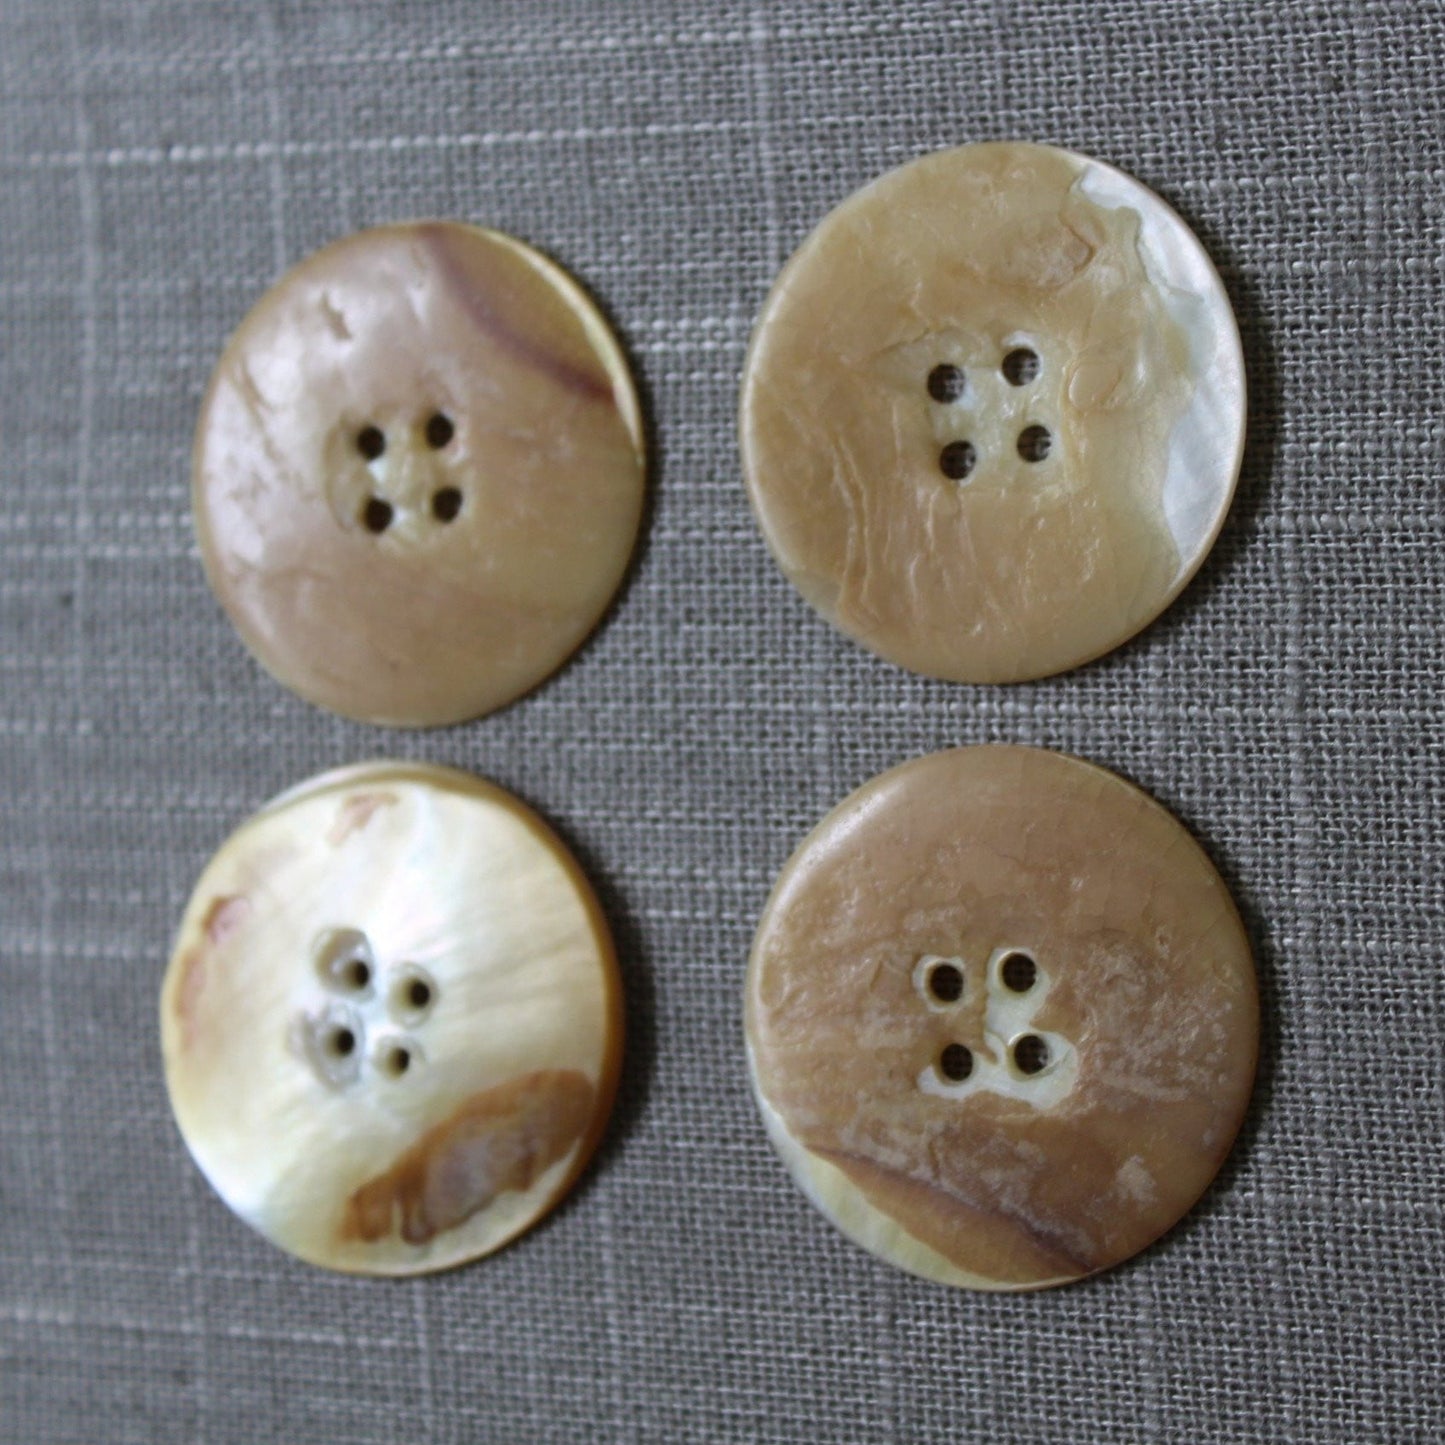 Vintage Pearl Buttons 1 7/16" White Natural MOP Lot 4 Buttons natural shell